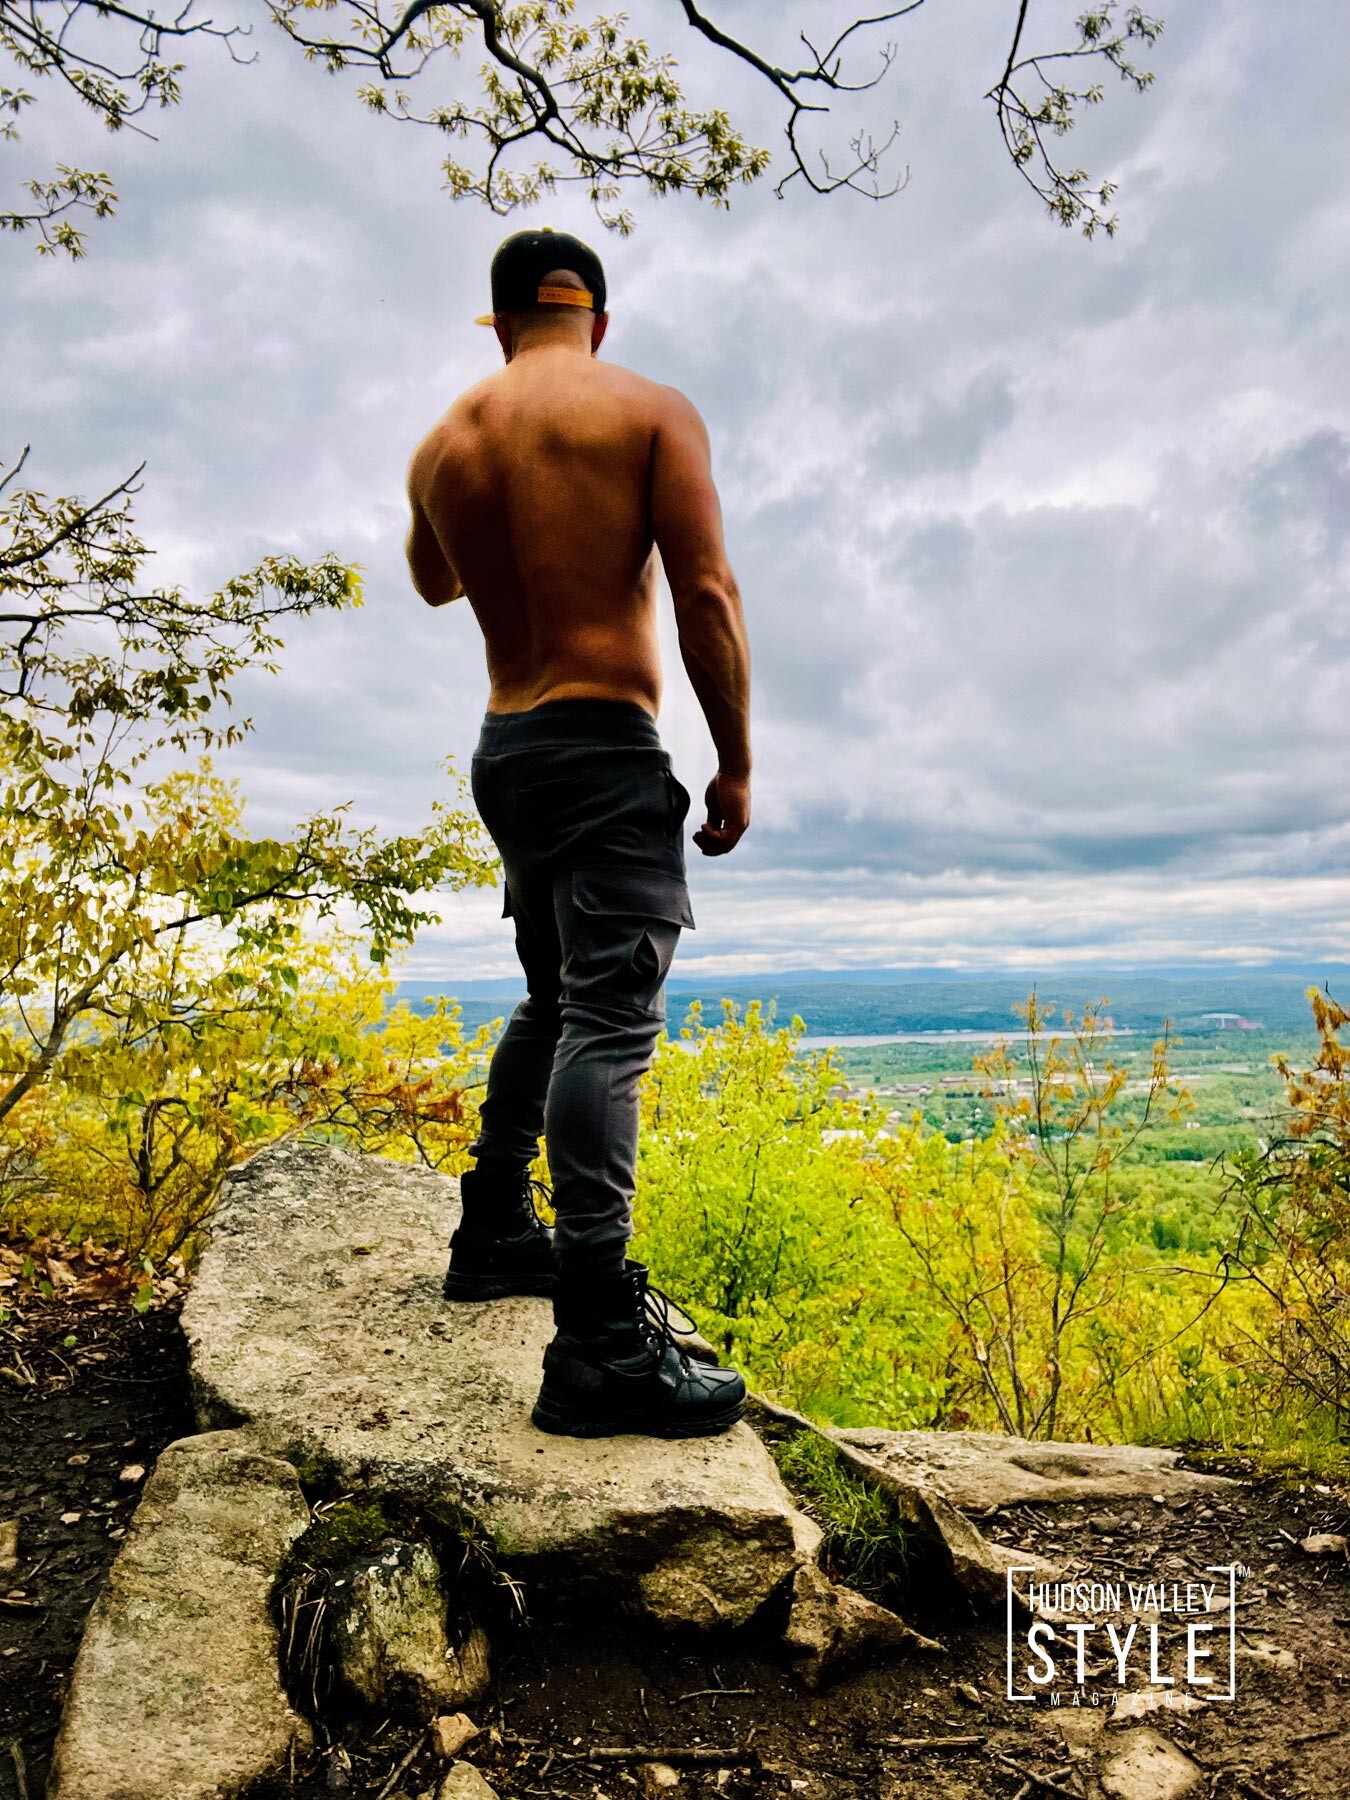 Why Hiking in the Hudson Valley is a Good Recreational Activity – by ISSA Certified Fitness Trainer, Bodybuilding Coach and Fitness Photographer Maxwell Alexander